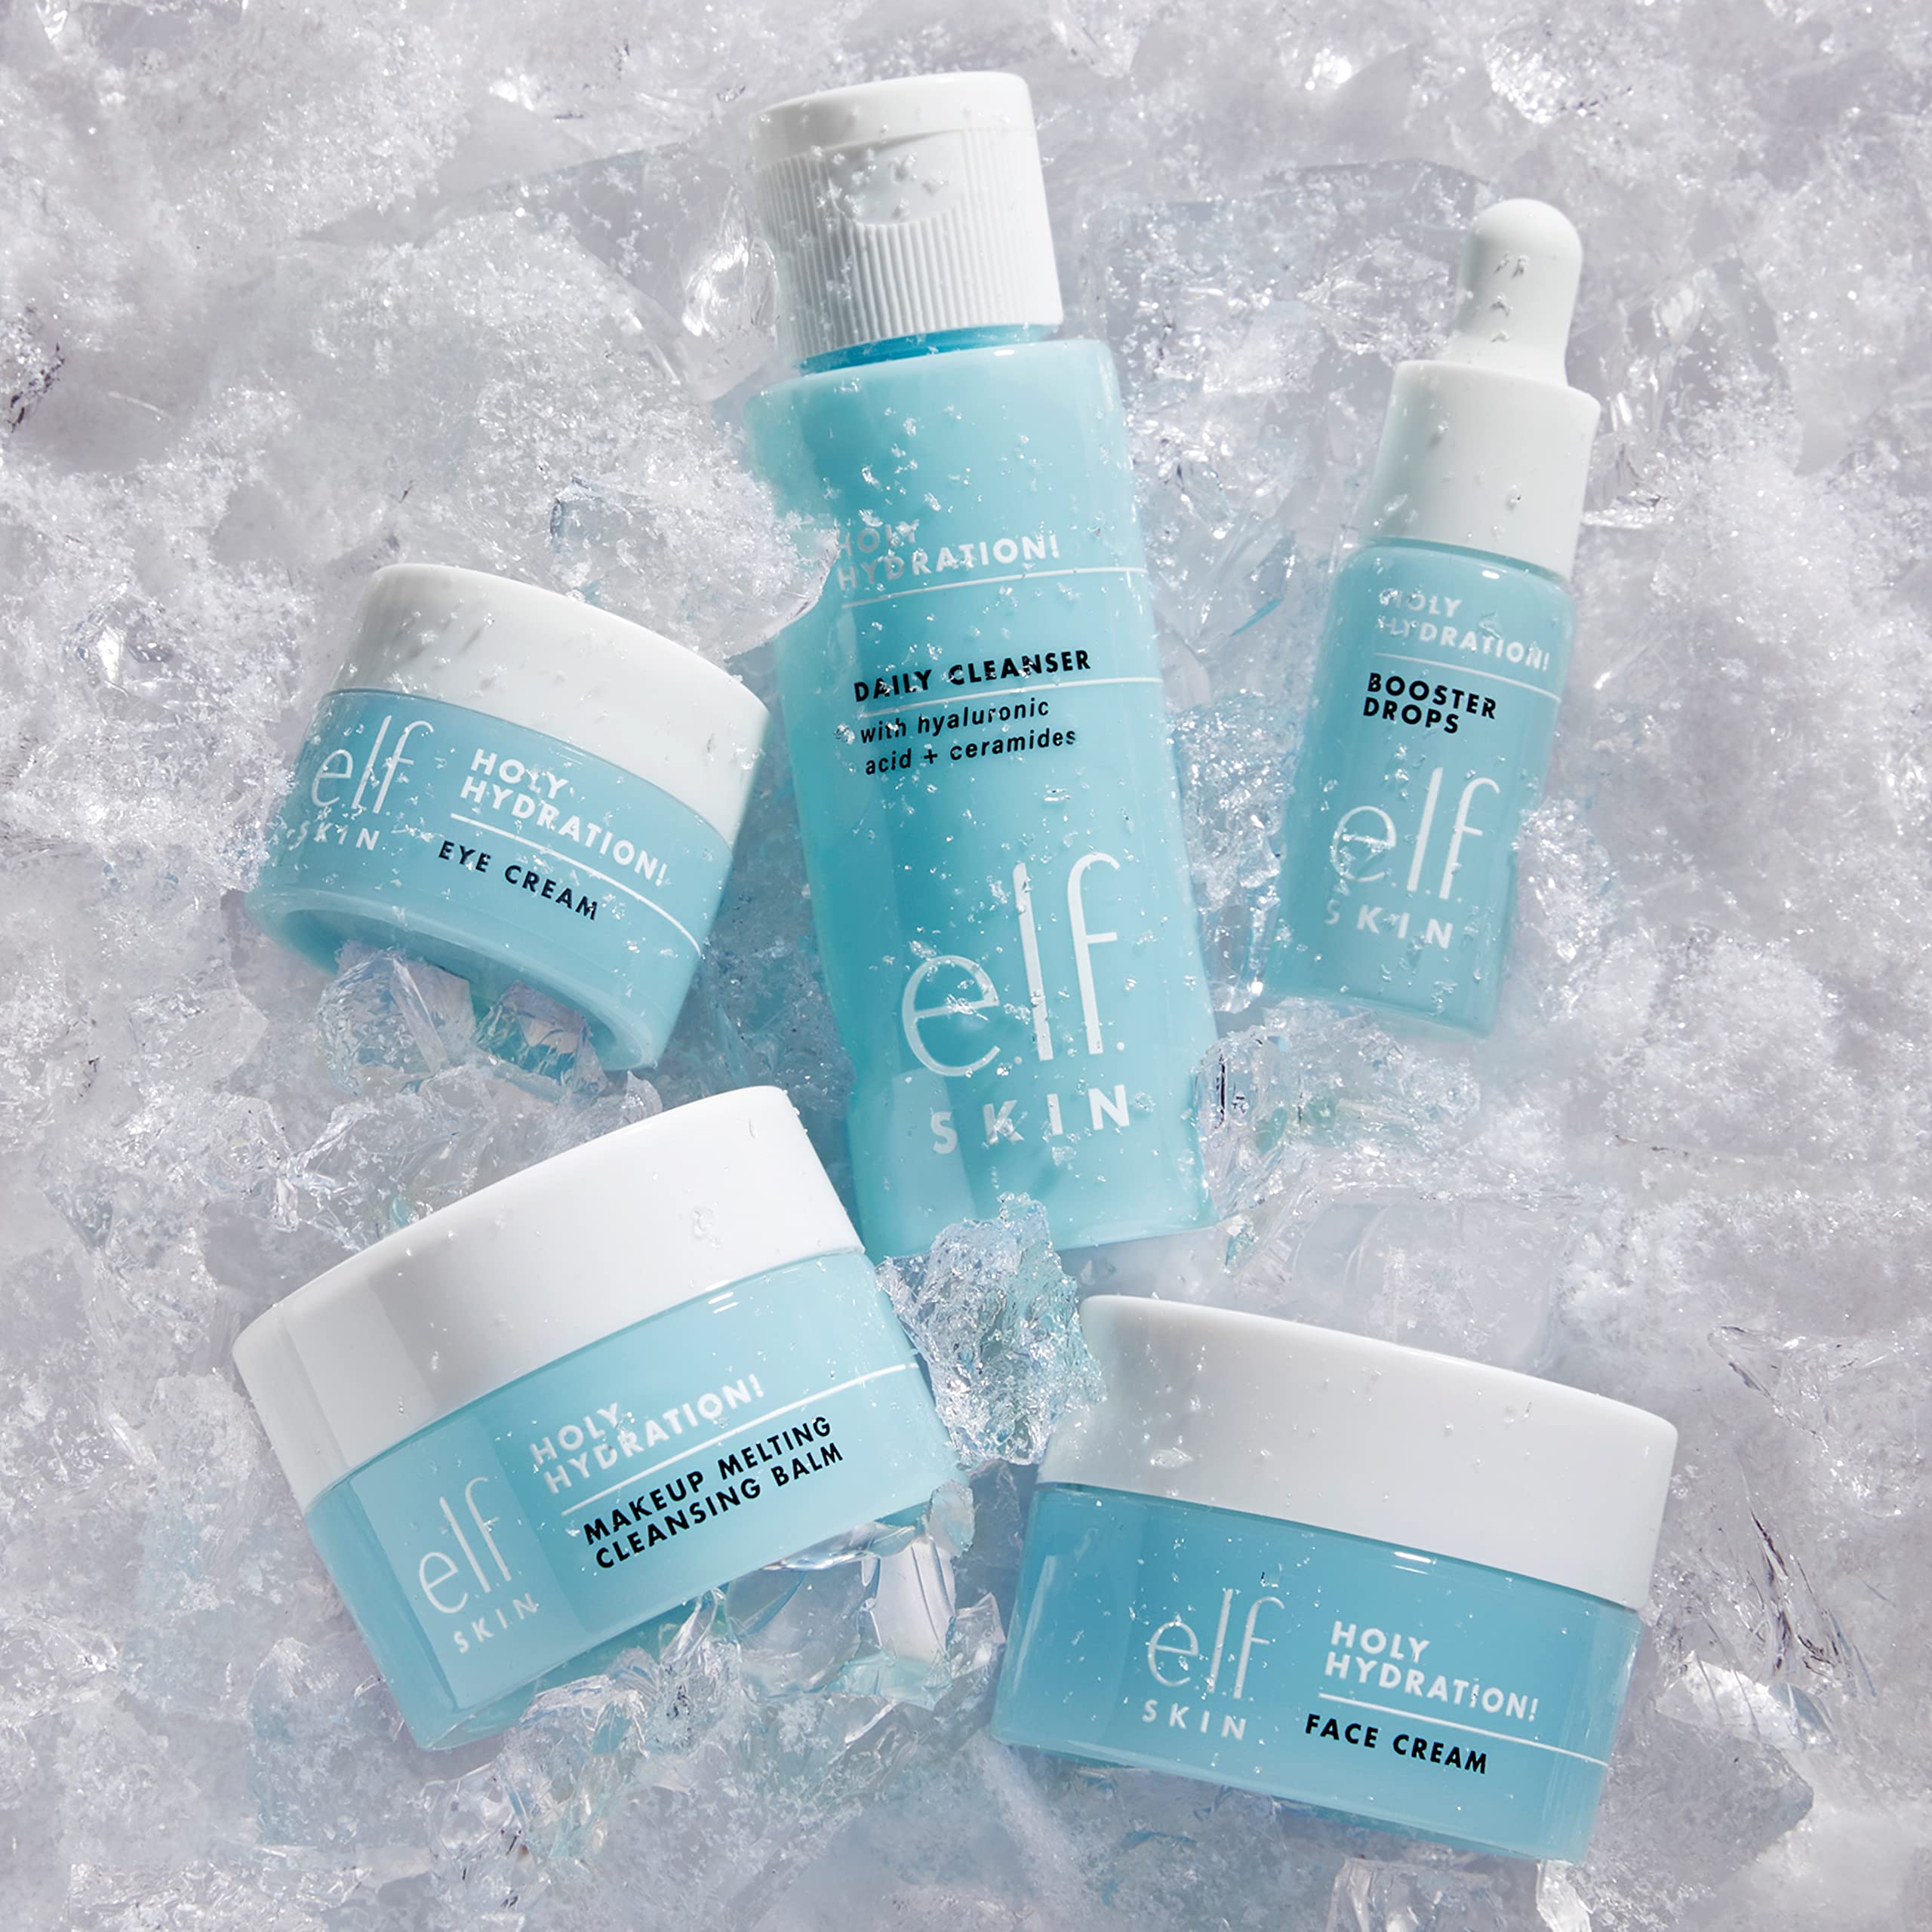 e.l.f.SKIN Hydrated Ever After Skincare Mini Kit, Cleanser, Makeup Remover, Moisturizer & Eye Cream For Hydrating Skin, TSA-friendly Sizes